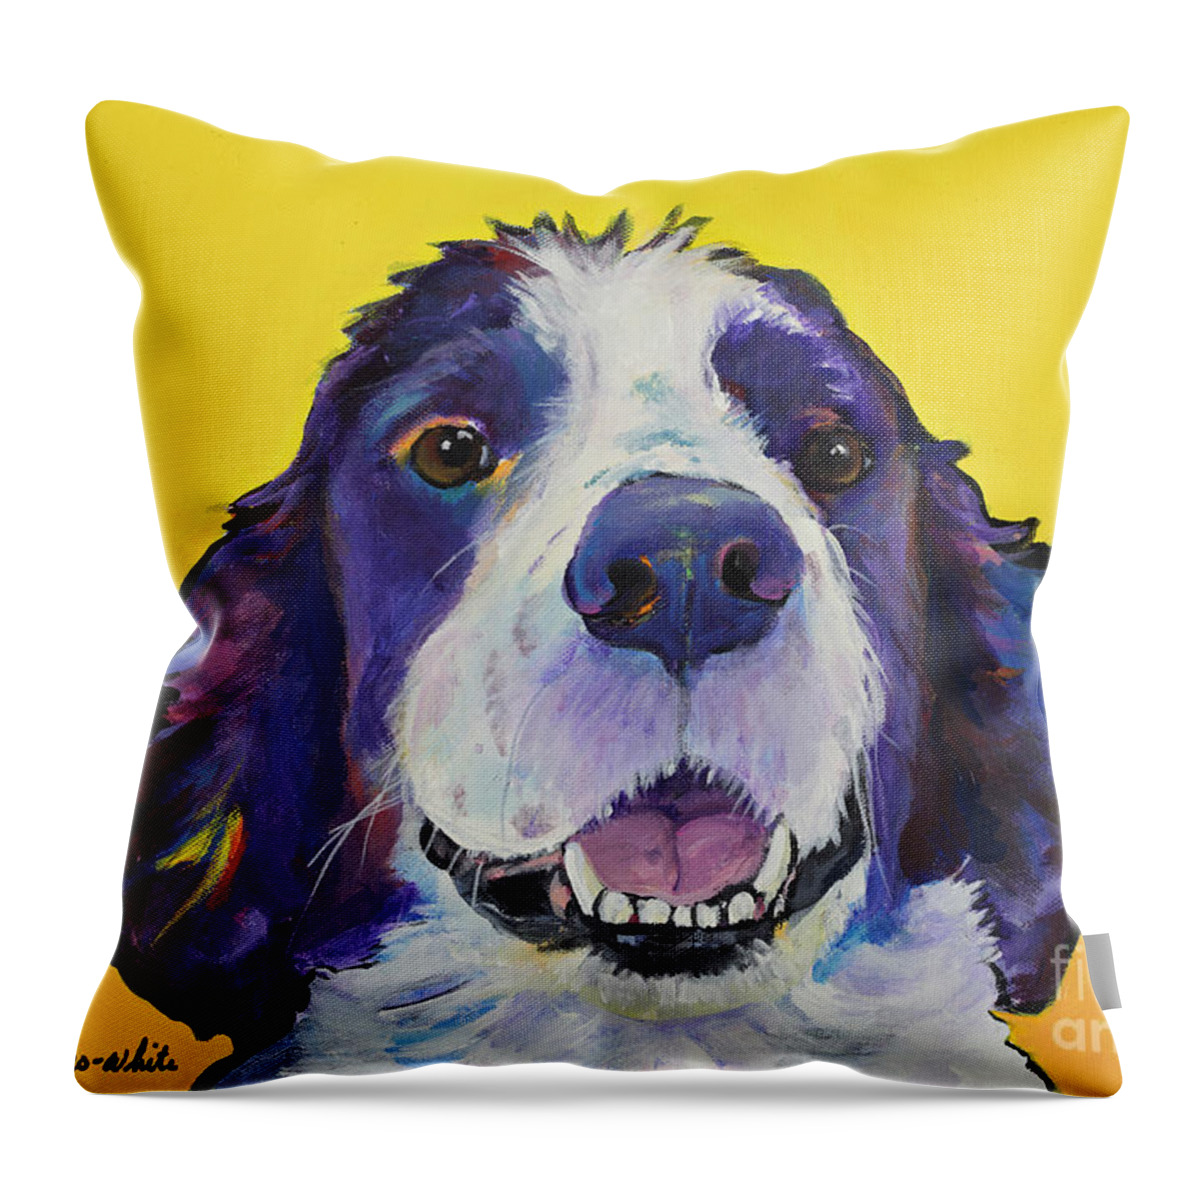 English Springer Spaniel Throw Pillow featuring the painting Dolly by Pat Saunders-White